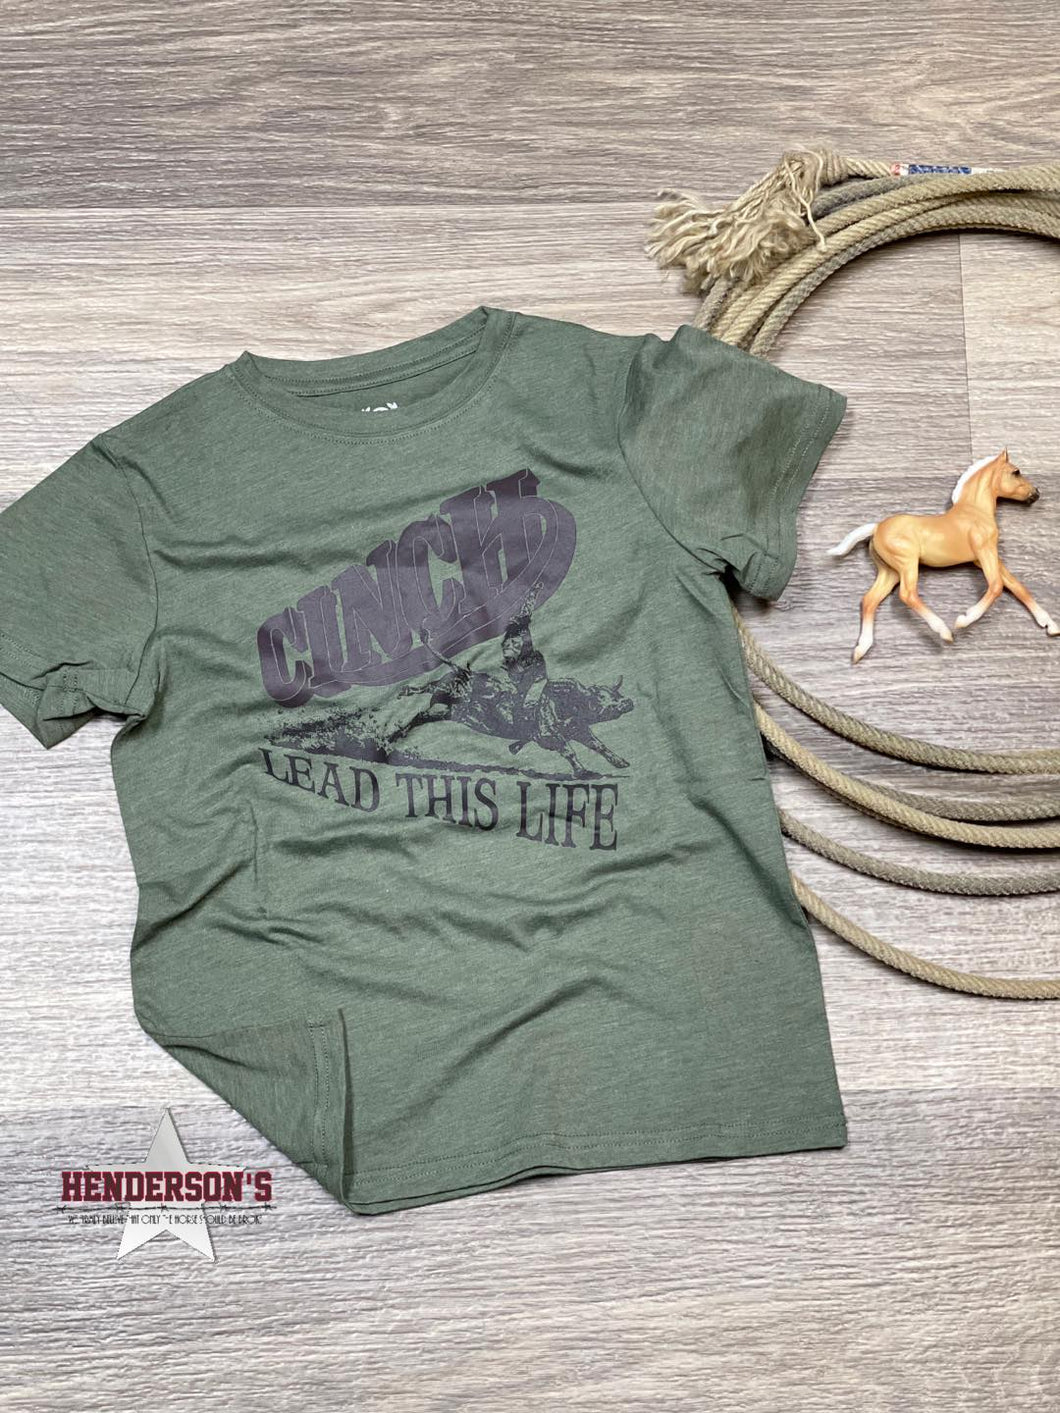 Boy's Cinch Lead This Life Rodeo Tee ~ Olive - Henderson's Western Store